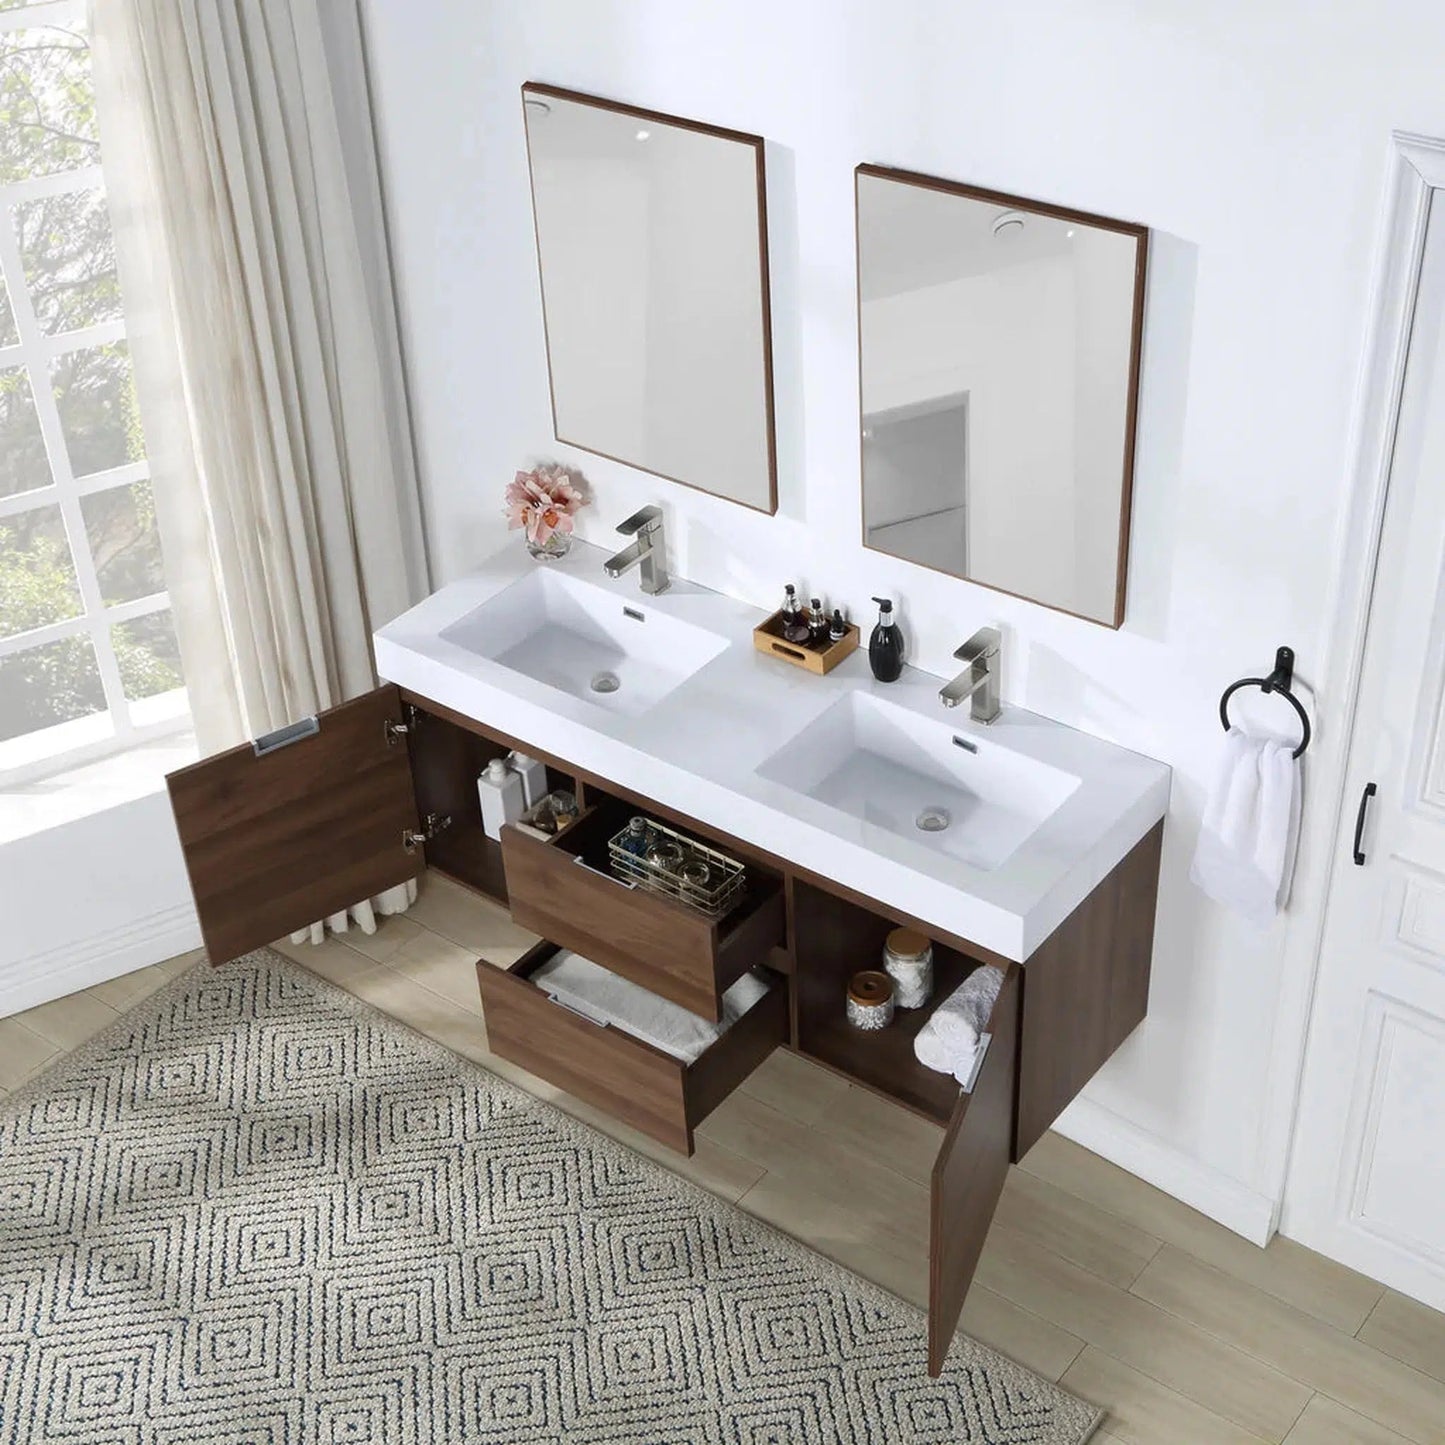 Stufurhome Valeria 59" Walnut Wall-Mounted Double Sink Bathroom Vanity with Rectangular Double Resin Sinks, 2 Drawers, 2 Doors and 2 Pre-Drilled Faucet Holes